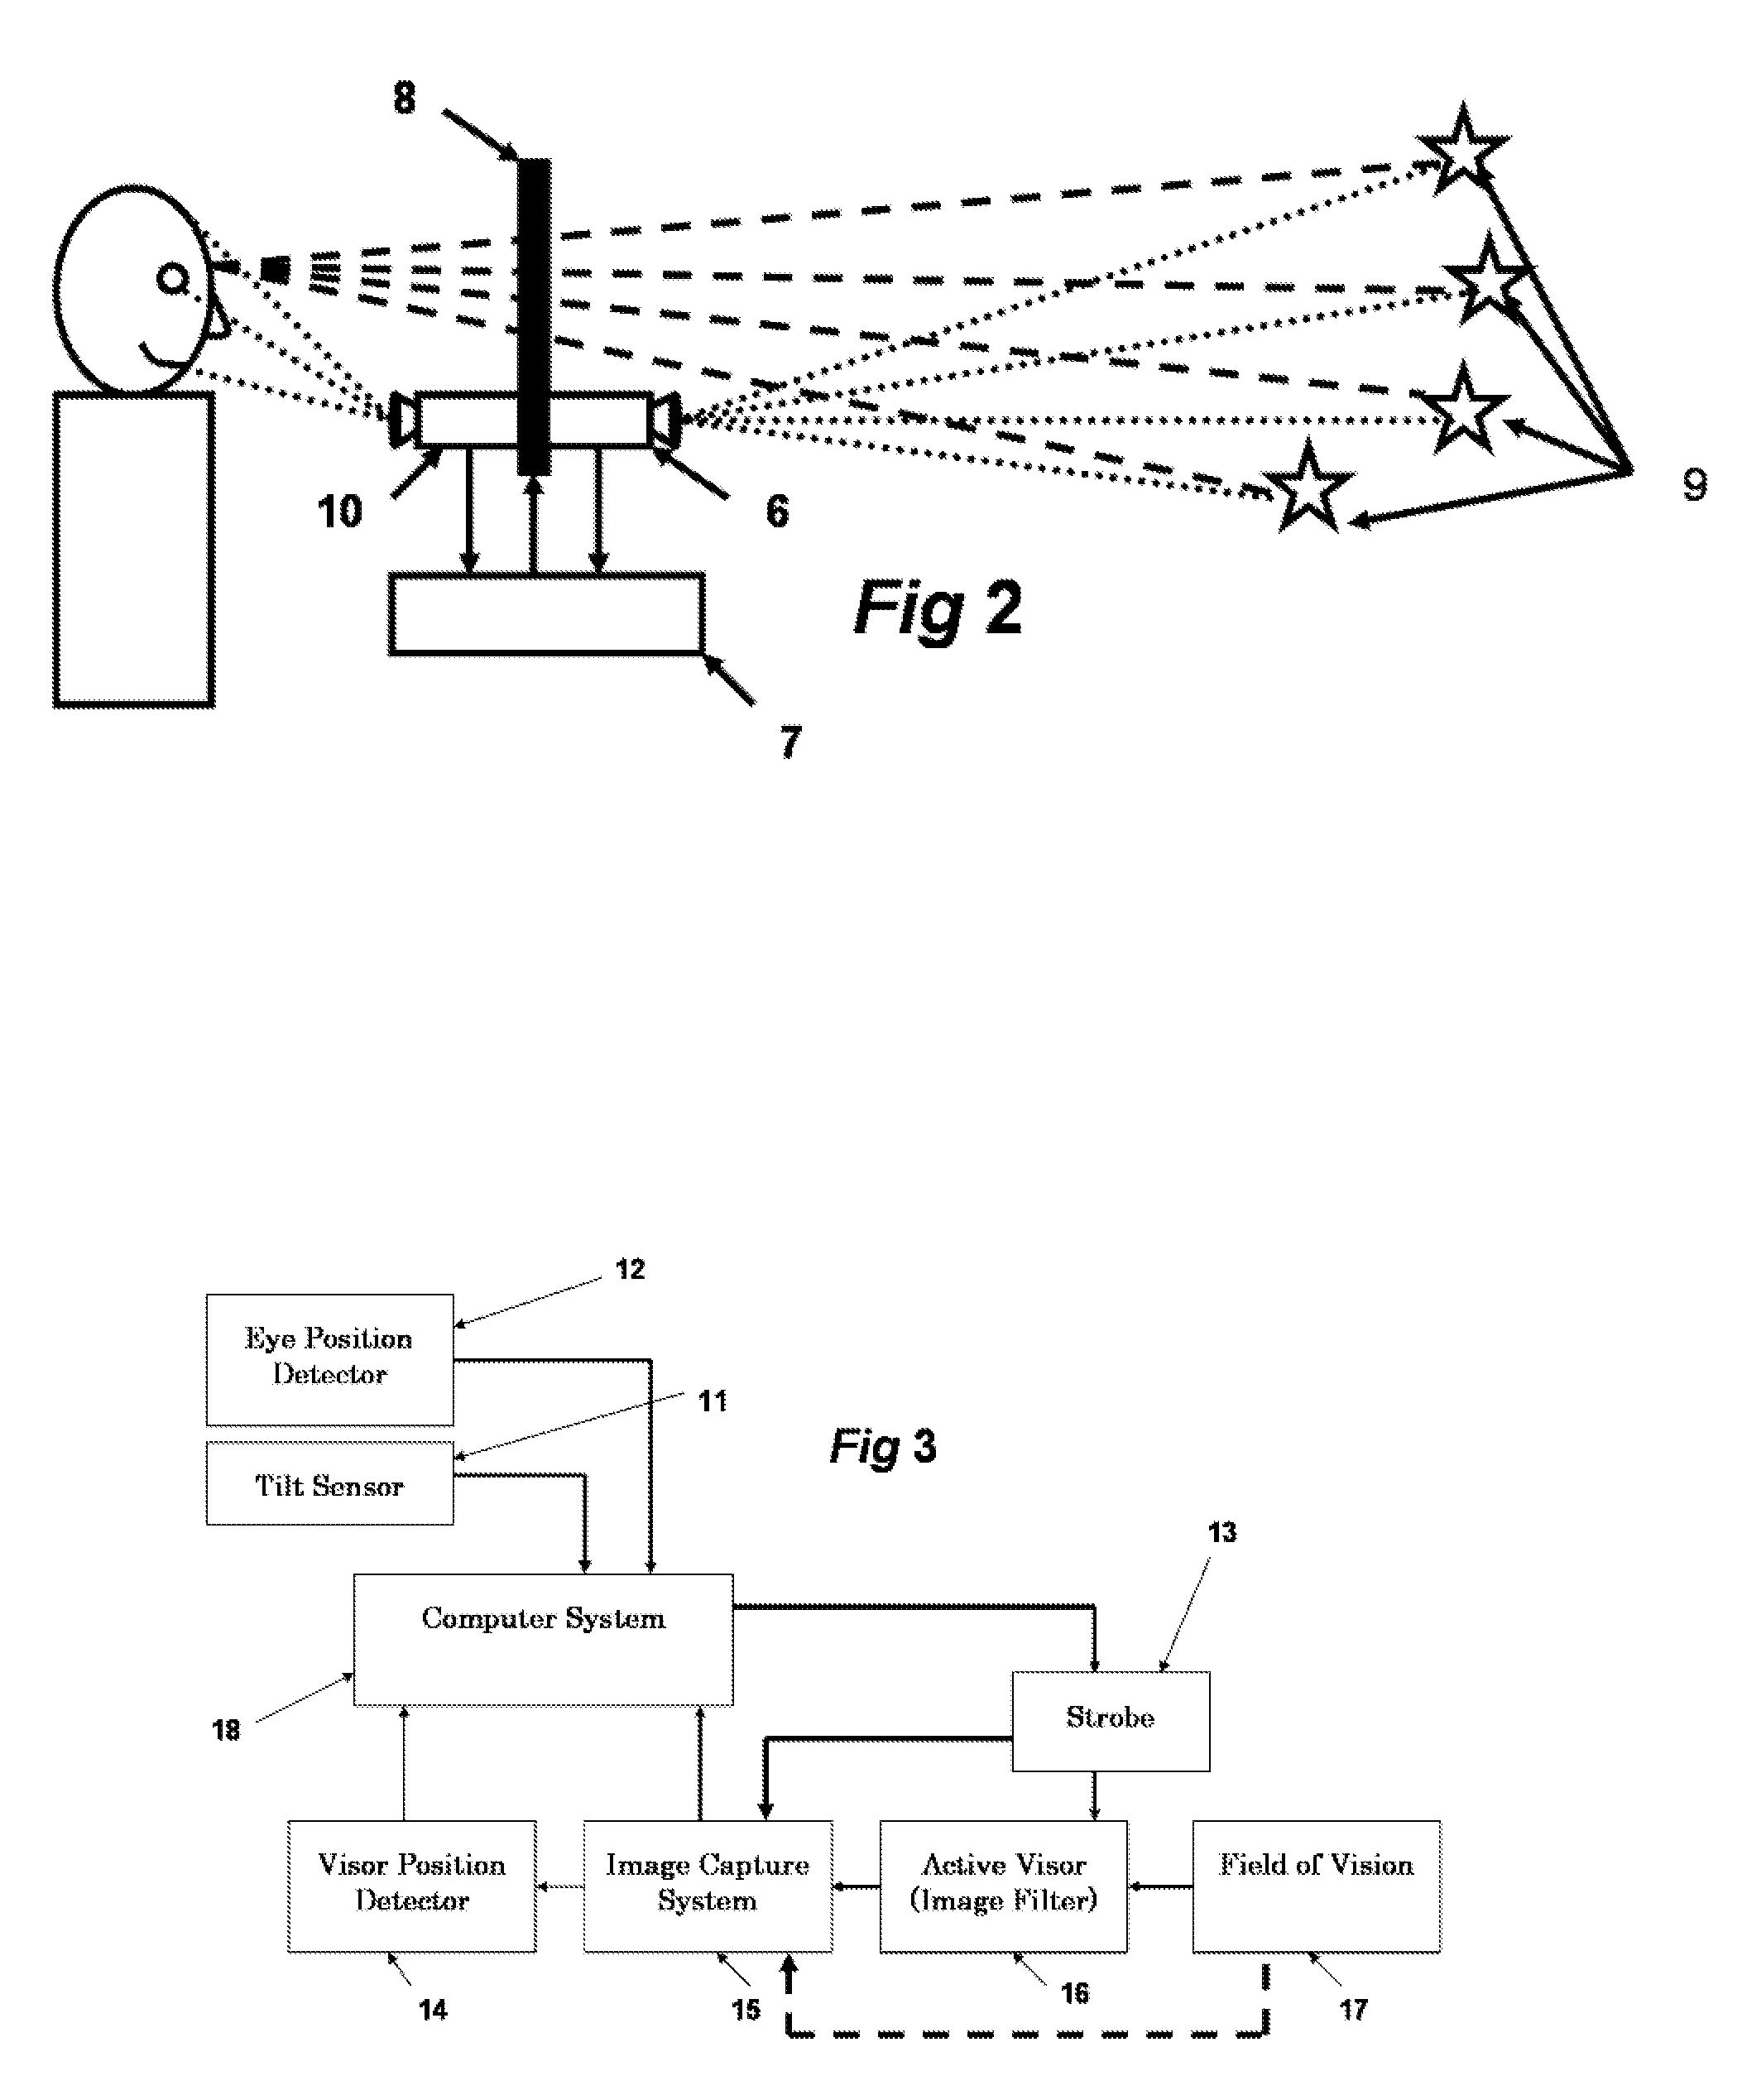 Active visor system for eliminating glare in field-of-vision from mobile and transient light sources and reflective surfaces